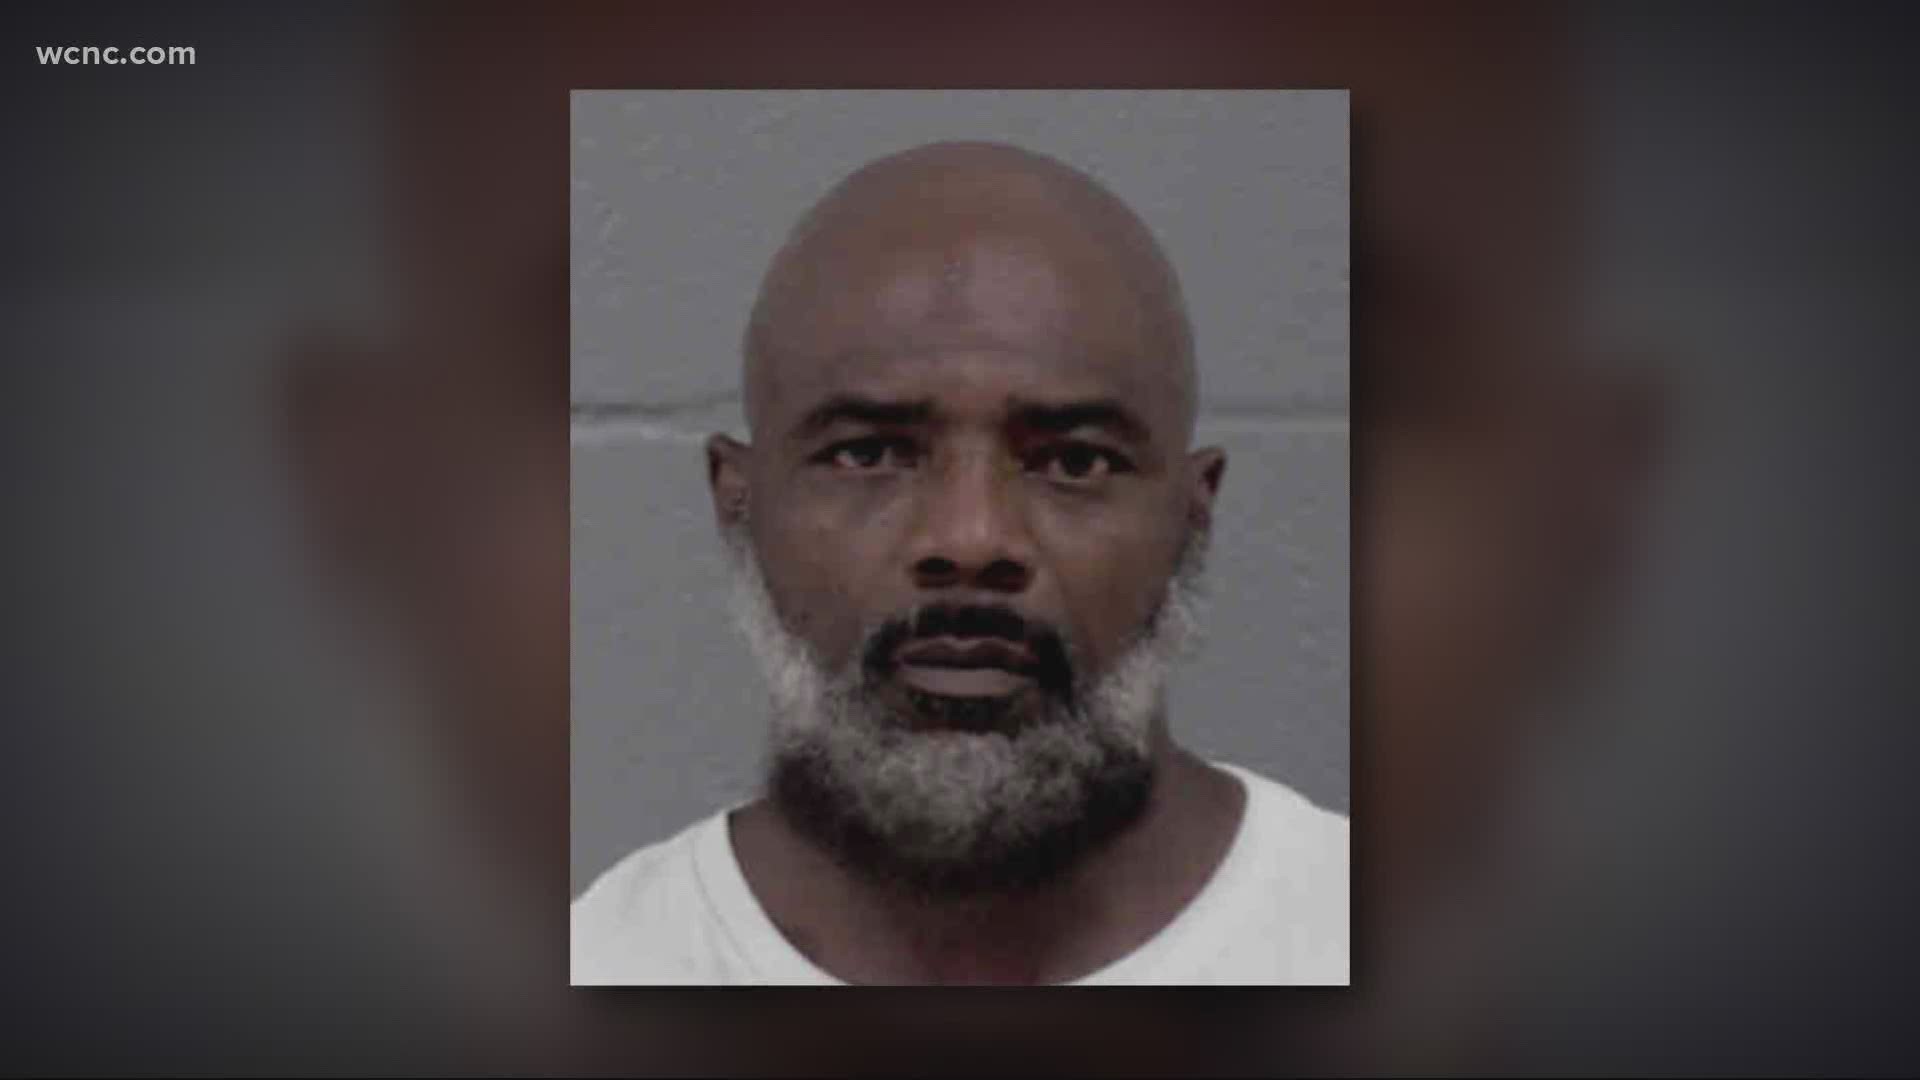 The 49-year-old suspect has been arrested and charged, according to CMPD. He was taken to to the custody of the Mecklenburg County Sheriff's Office.